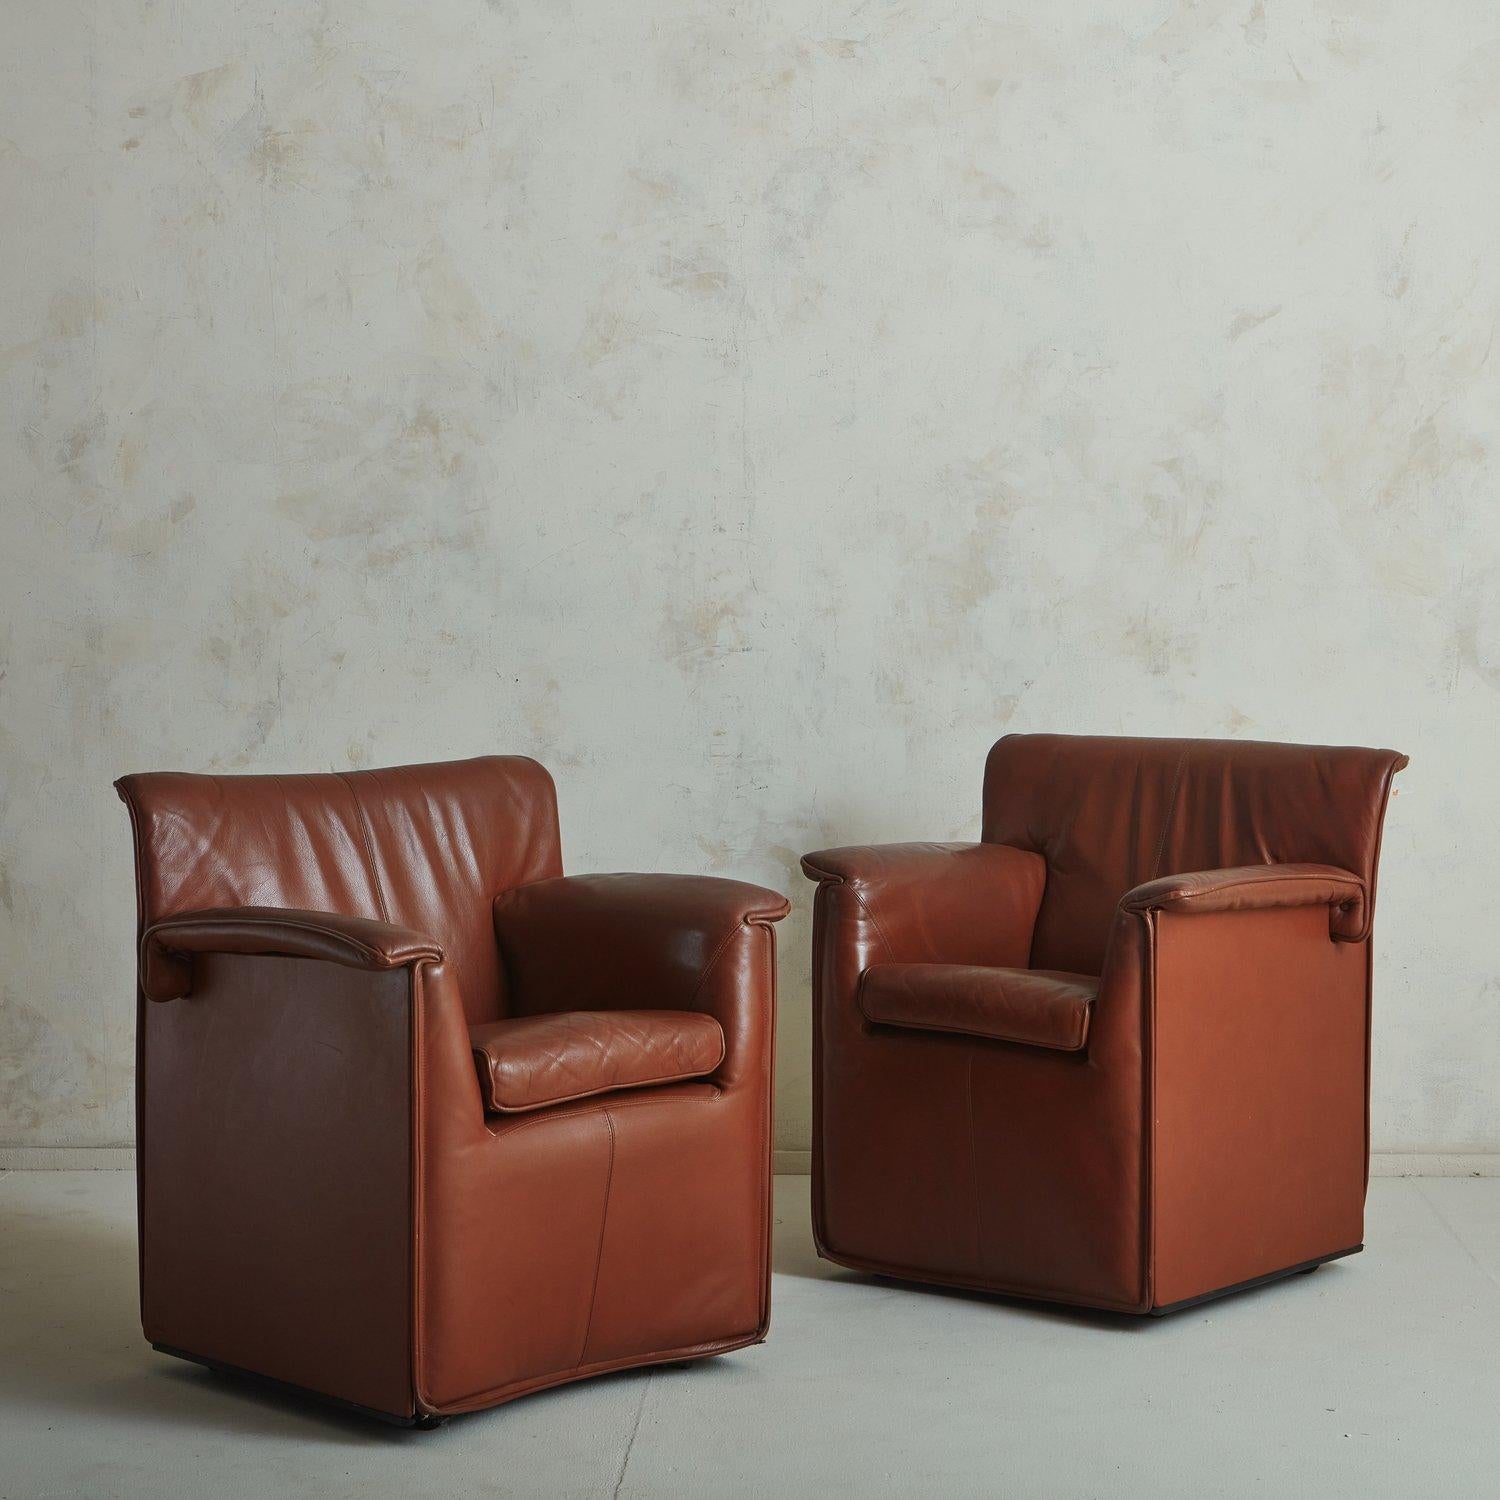 A set of ‘Lauriana’ chairs designed by Afra + Tobia Scarpa for B&B Italia in 1978. These chairs retain their original patinated cognac leather upholstery with stitch detailing. They feature stately profiles with circular button details on the back,